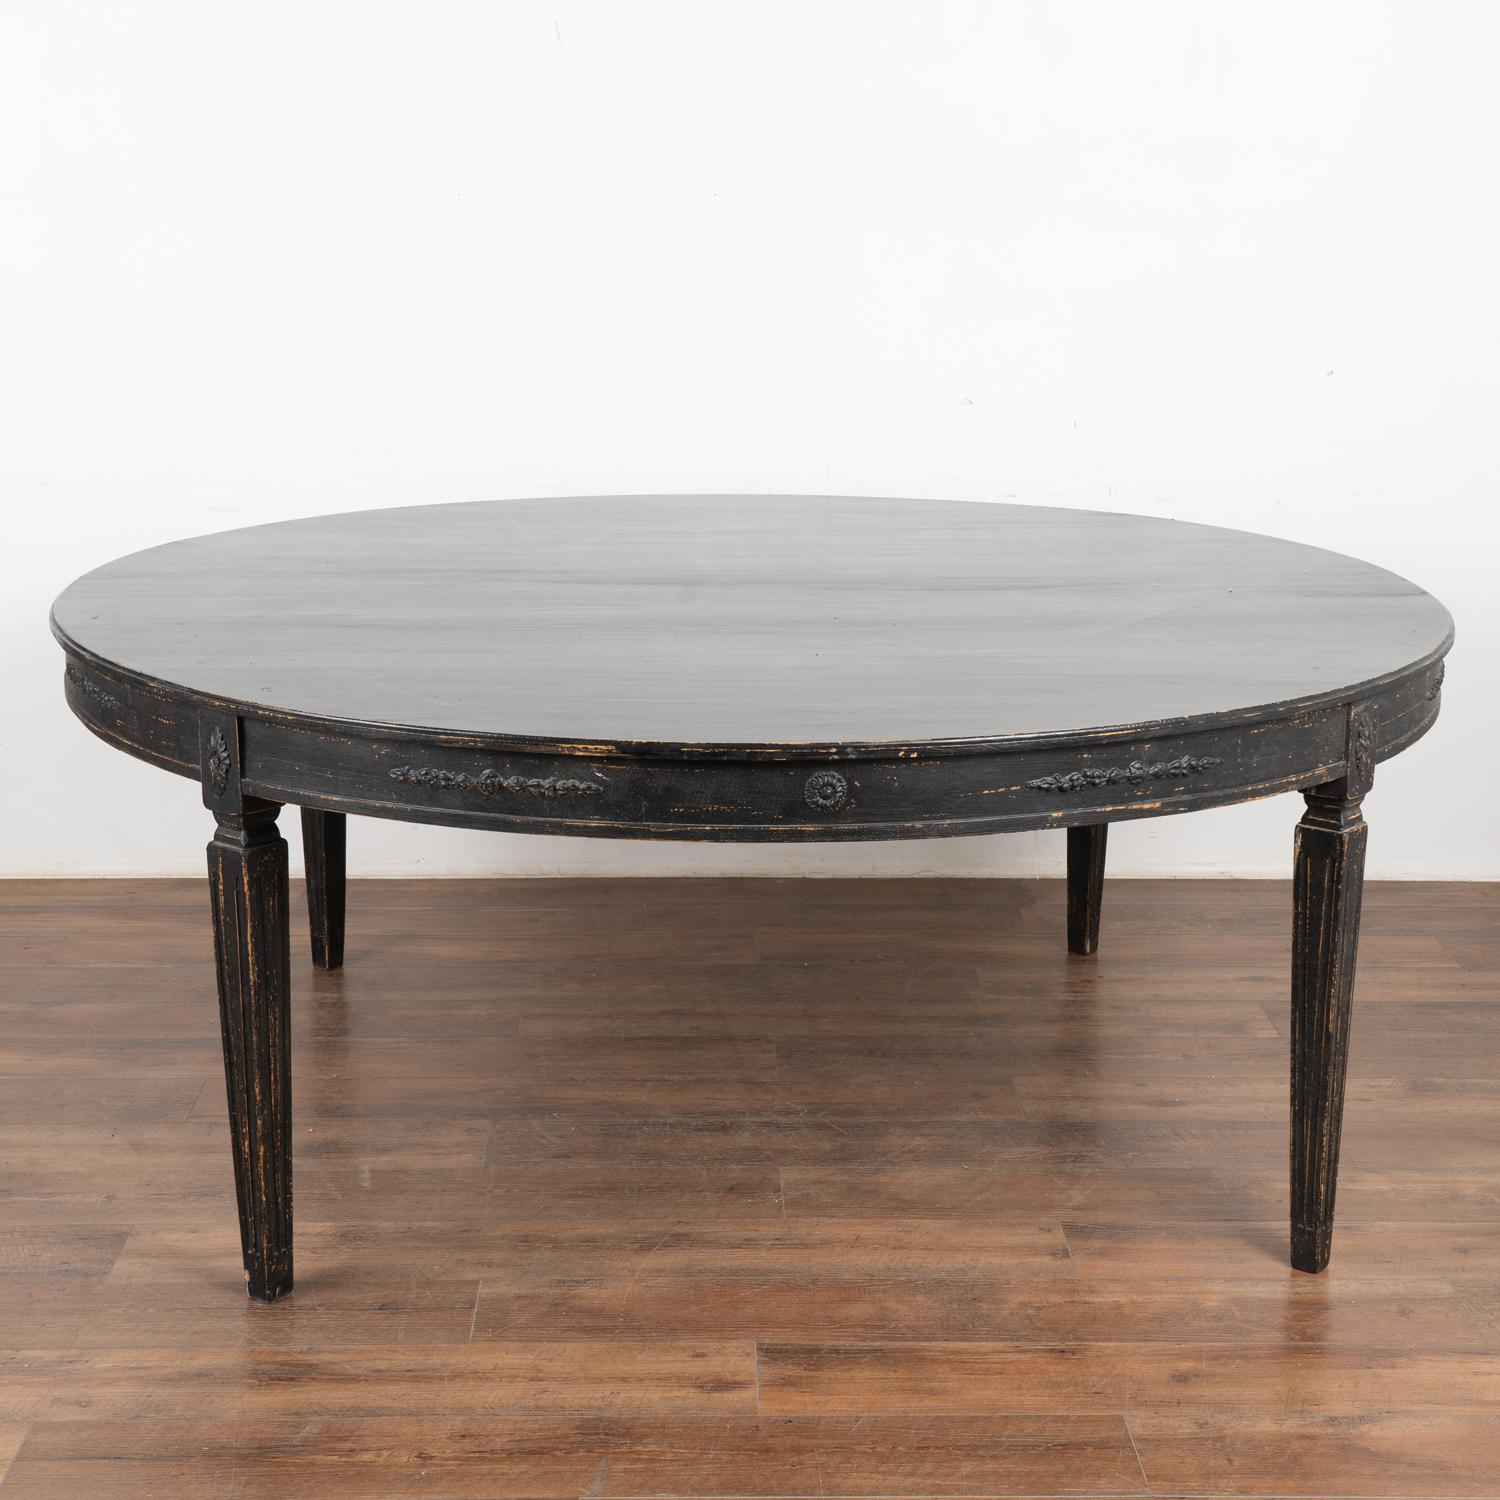 Round dining table, 6.5' diameter with the look of the Gustavian style.
This size table did not exist in the Gustavian period; this new table mirrors the Swedish style in a larger size for today's modern home.
Lovely tapered fluted legs and applied